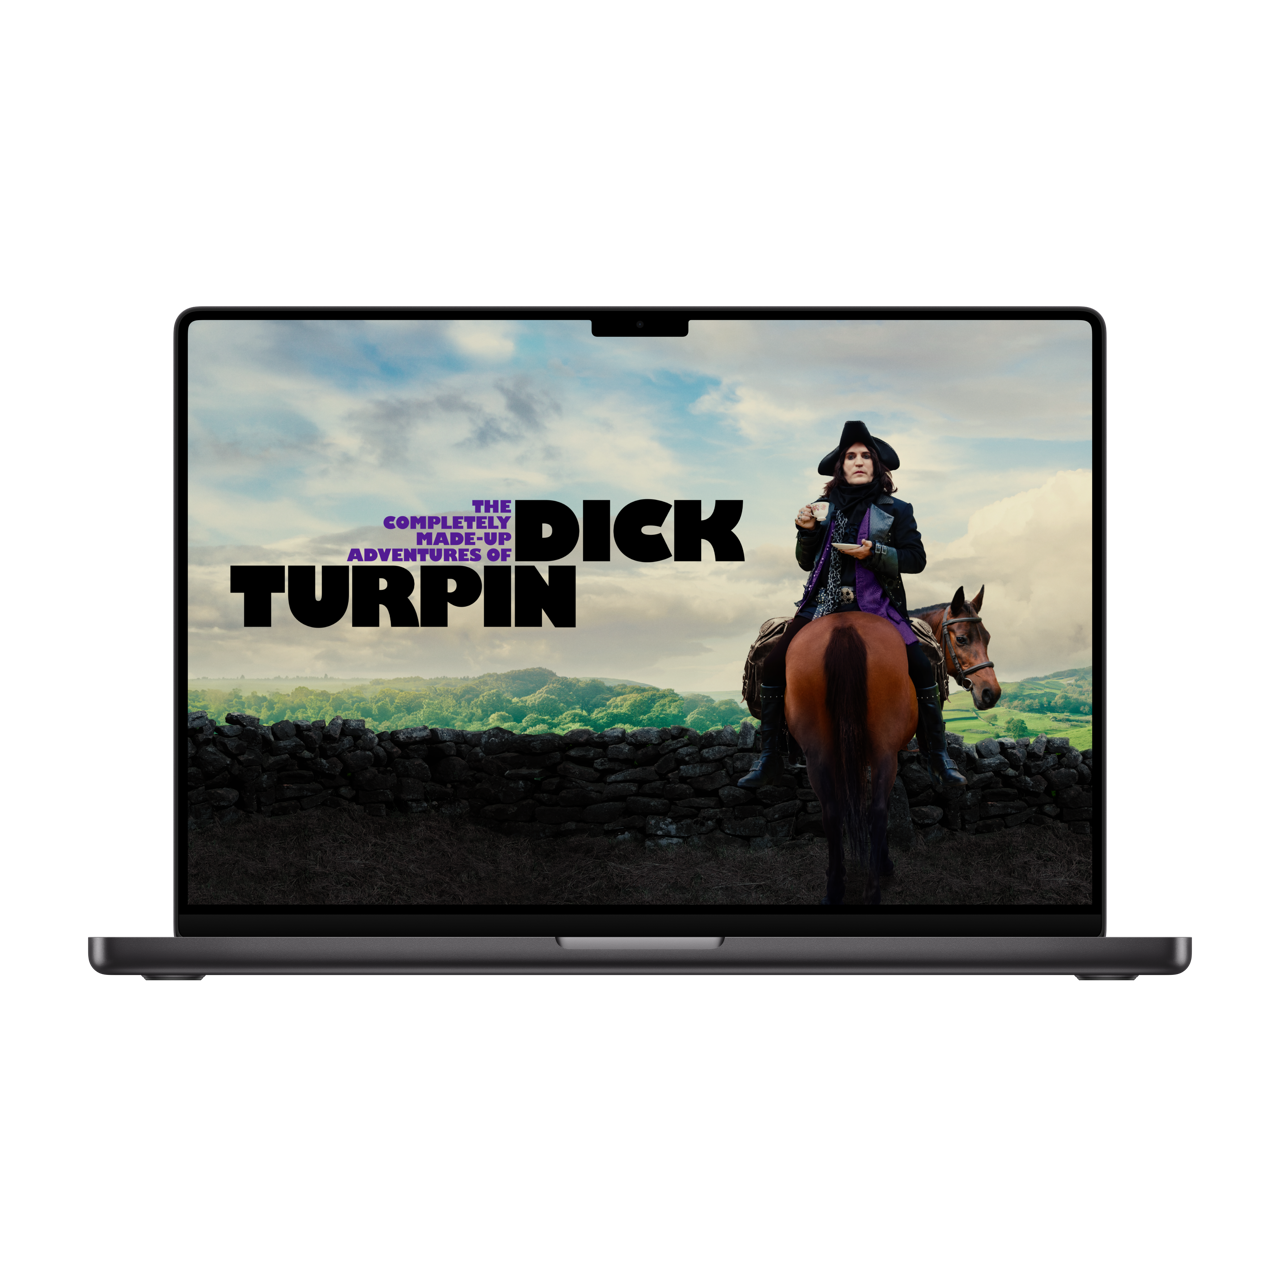 Apple TV Plus exclusive screening of The completely made-up adventures of Dick Turpin